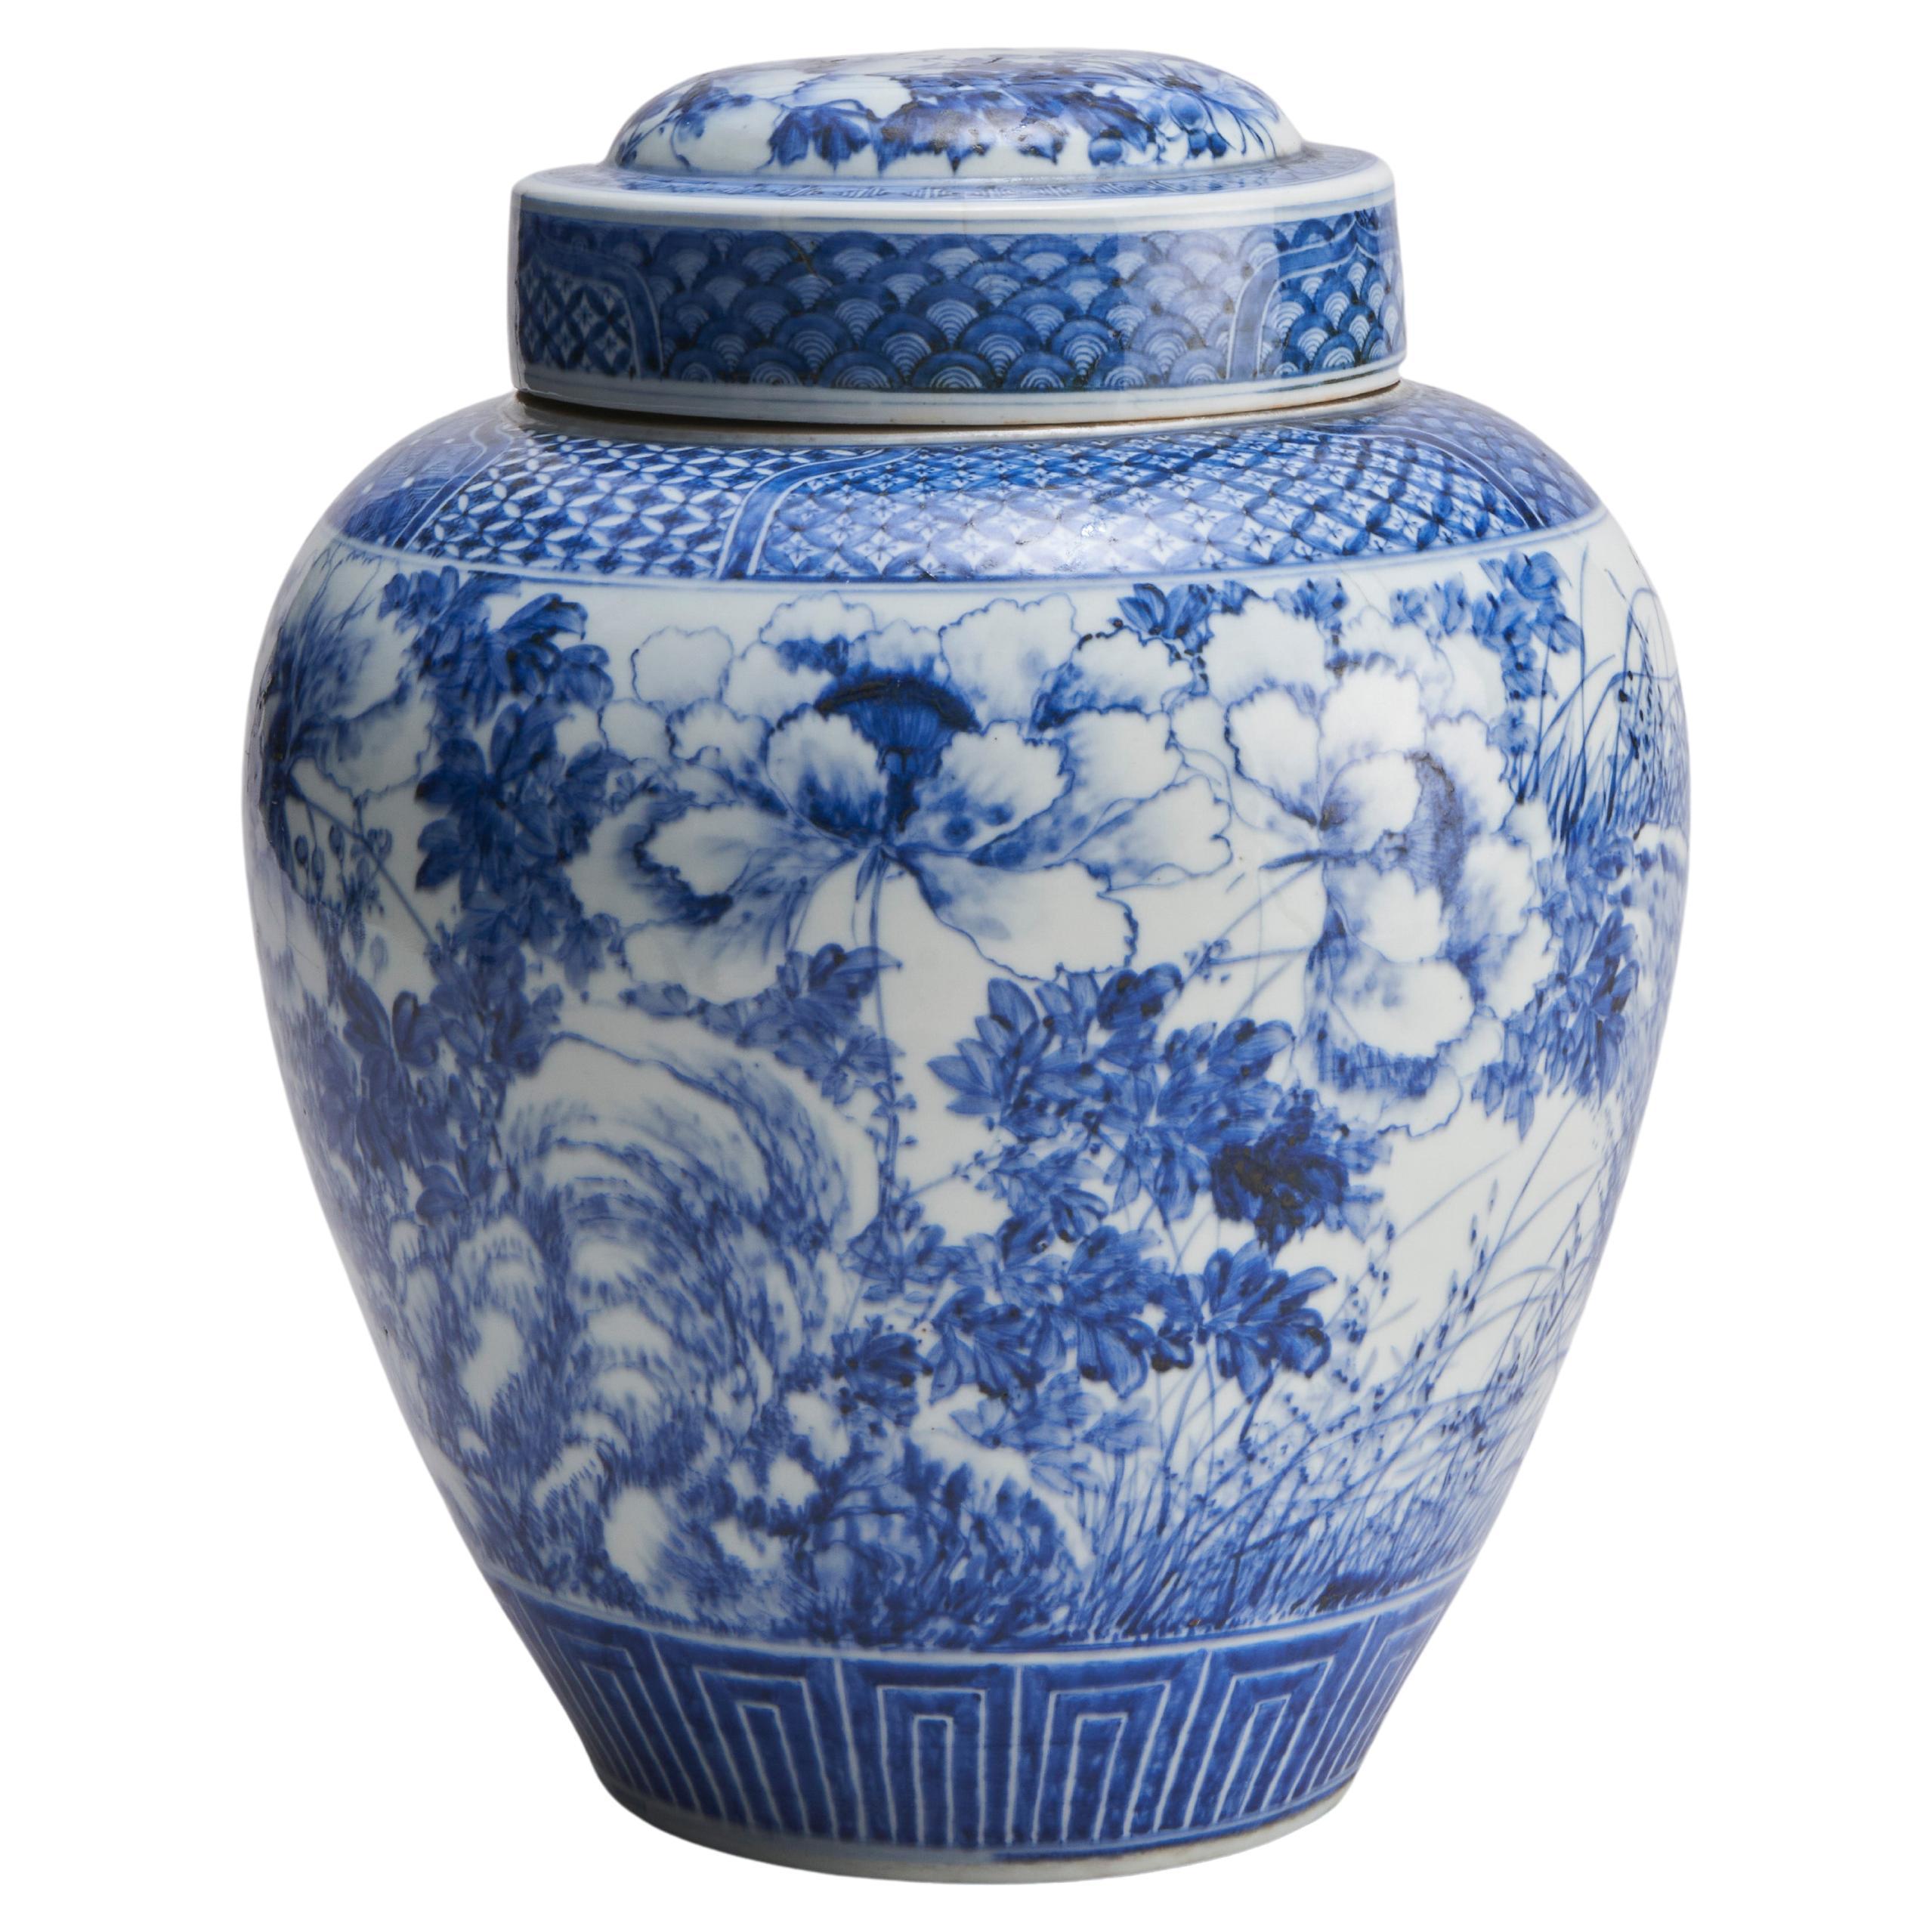 An unusual Japanese porcelain blue and white jar with inner stopper For Sale